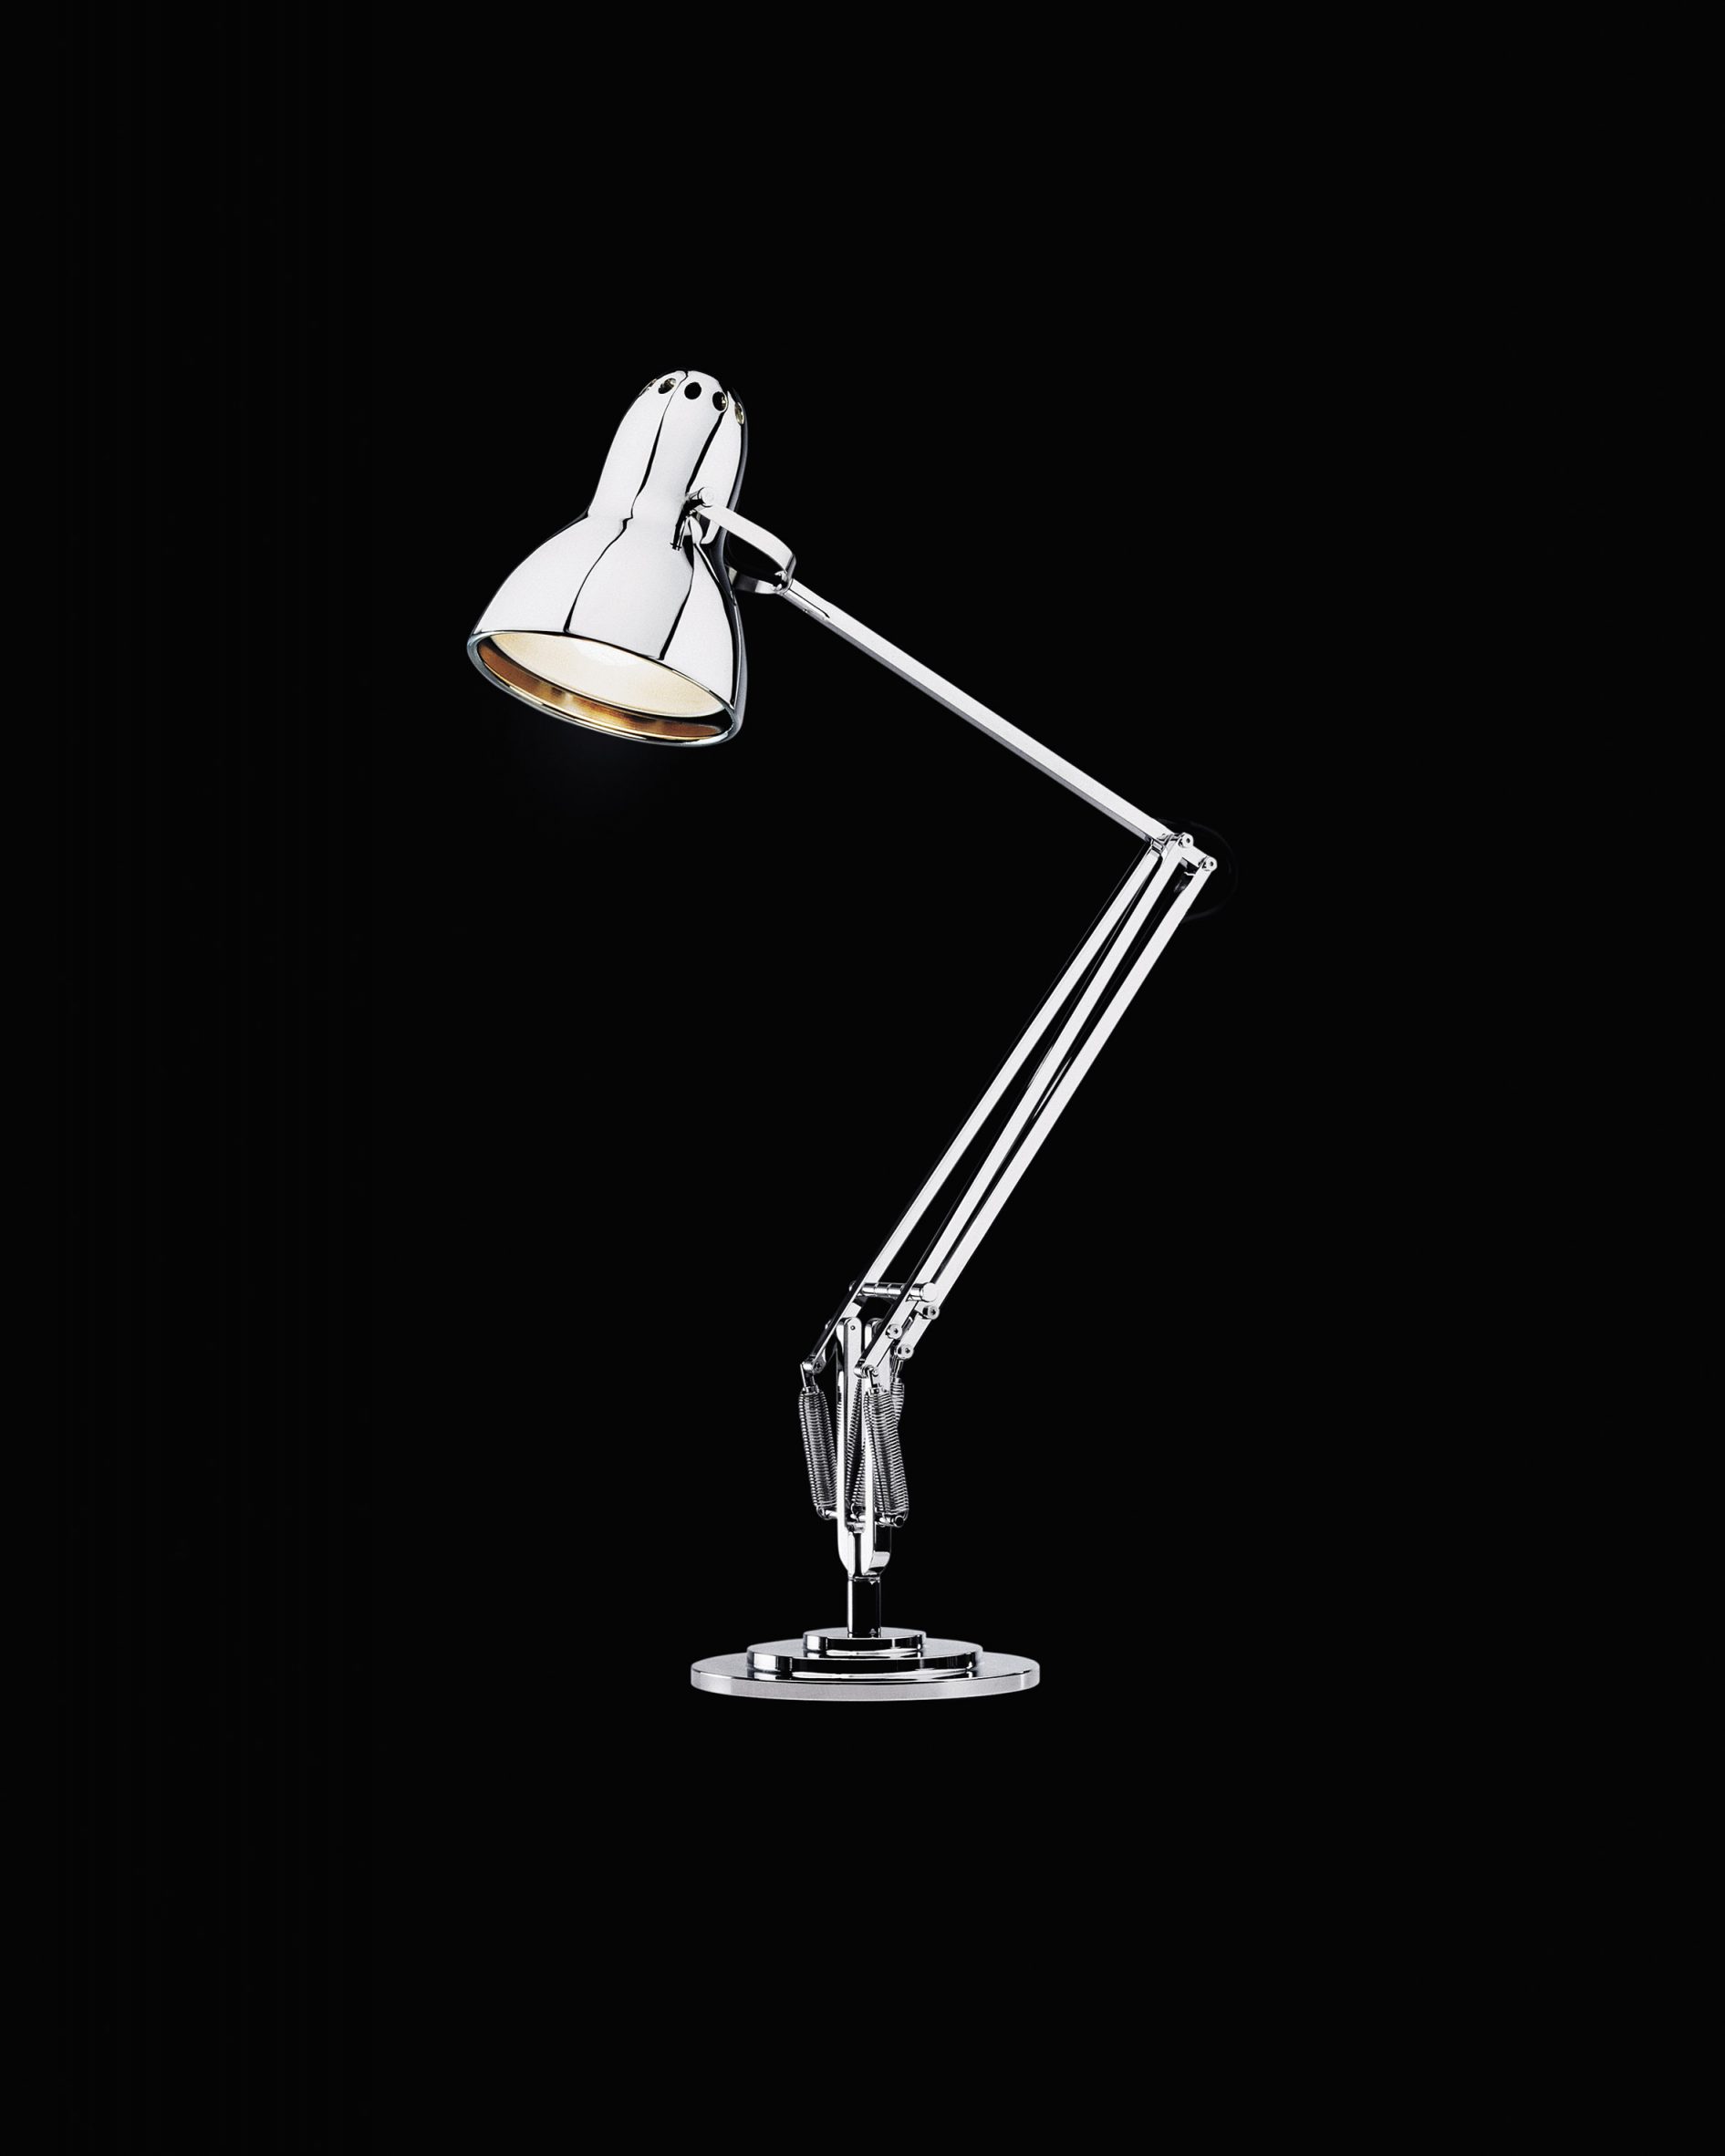 Anglepoise Type 3 desk lamp by Kenneth Grange